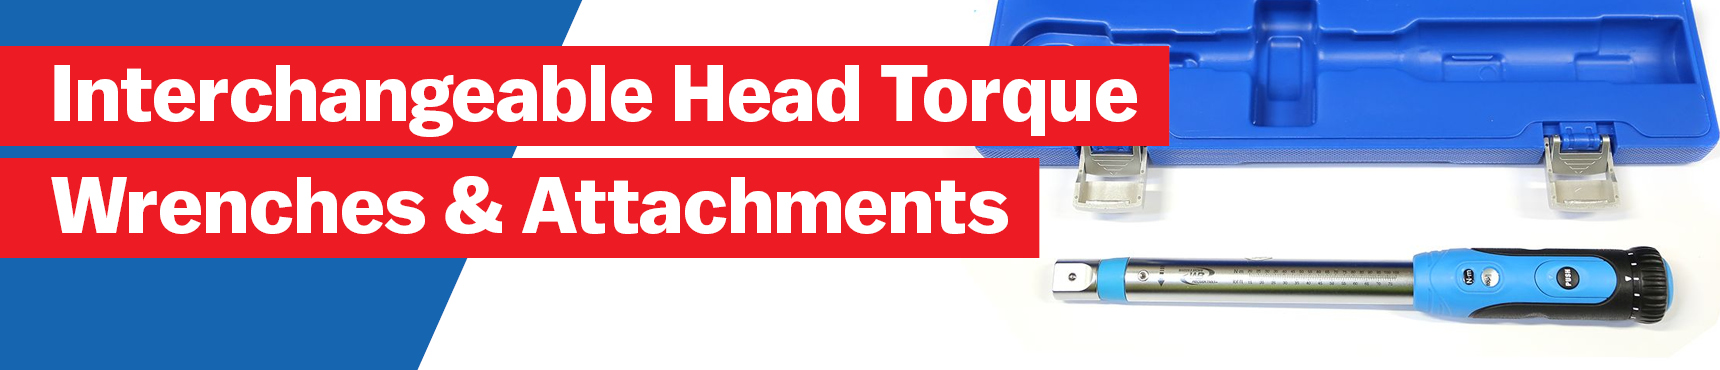 Interchangeable Head Torque Wrenches & Attachments